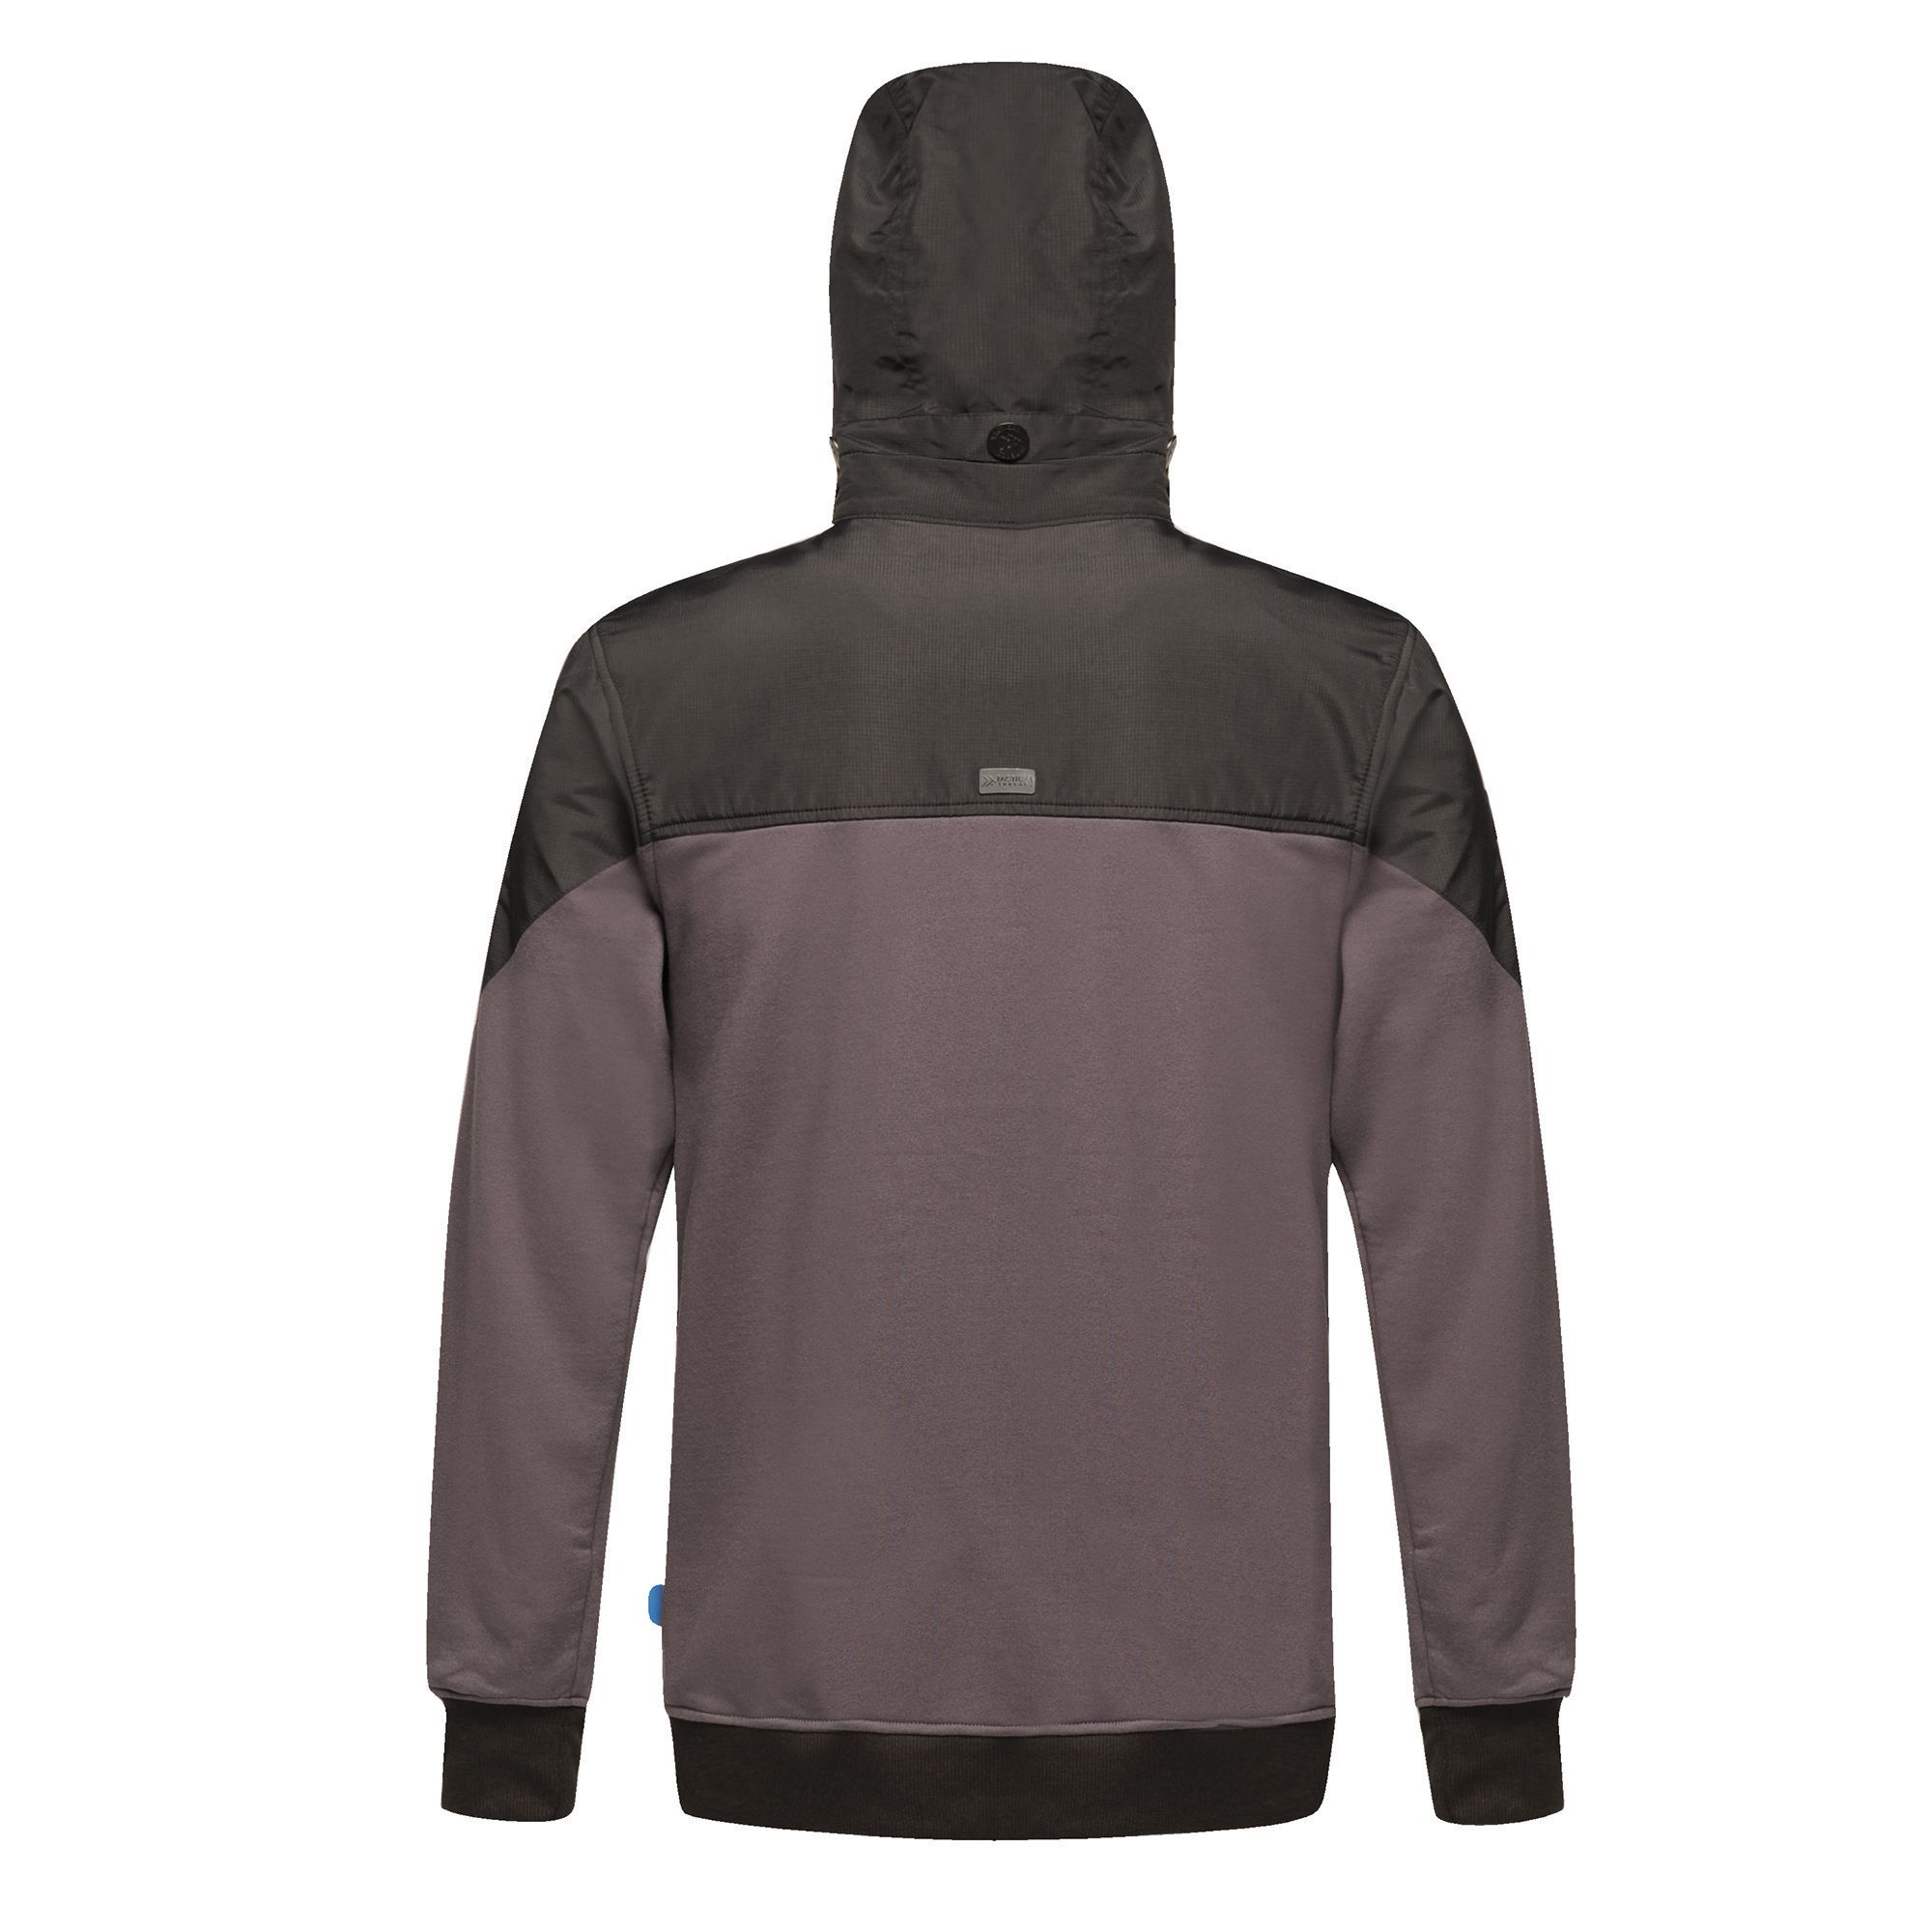 50% cotton/50% polyester brushed back fabric. Woven water repellent fabric on shoulder, sleeves, front and back panels. Centre front zip with inner chin guard. Detachable hood. 2 chest pockets and 2 side pockets. Ribbed cuffs and hem.